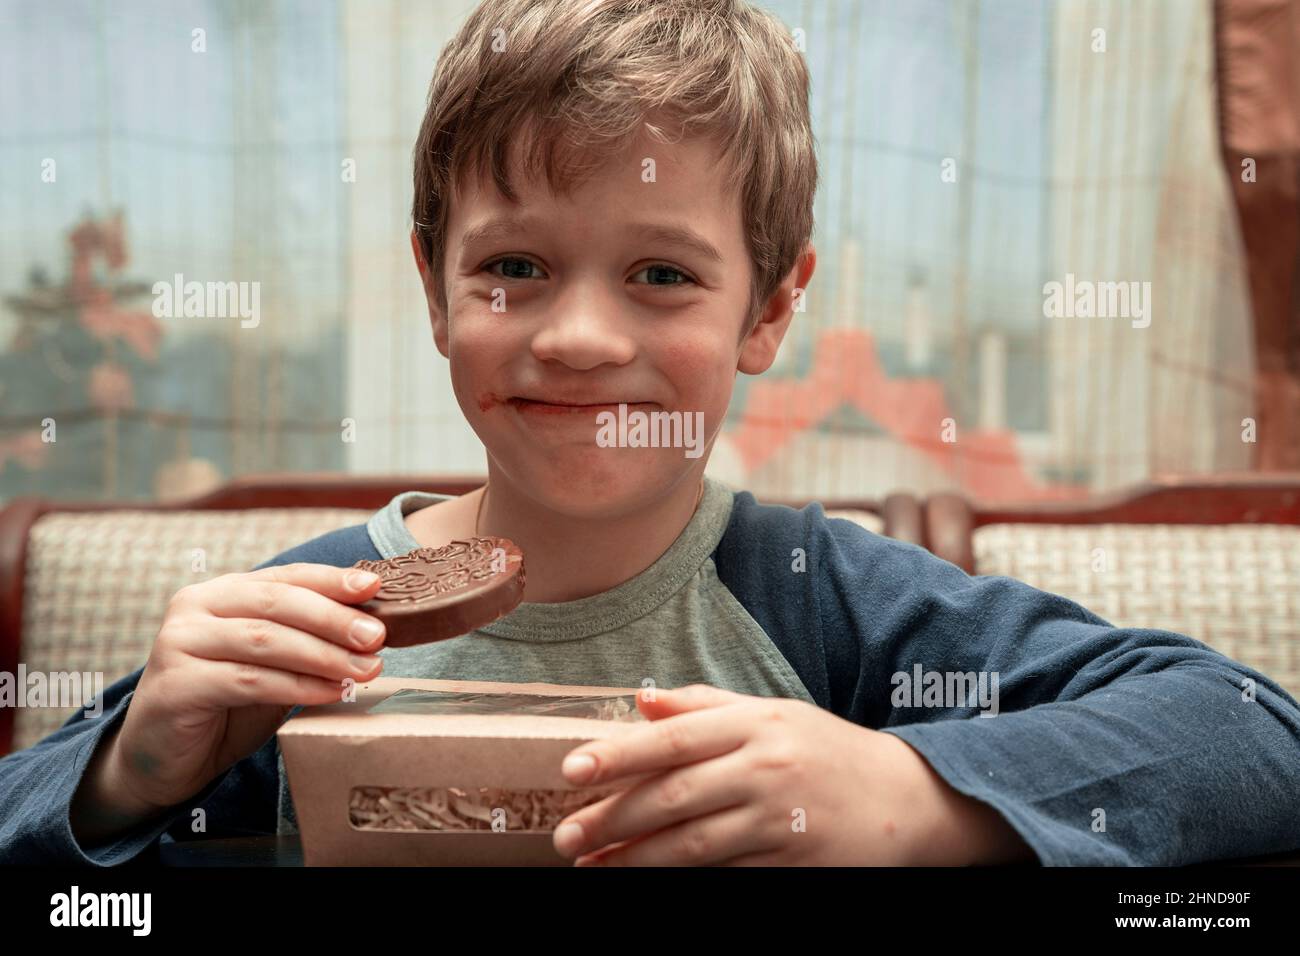 funny cute Caucasian boy who eats chocolate with pleasure. chocolate covered face Stock Photo